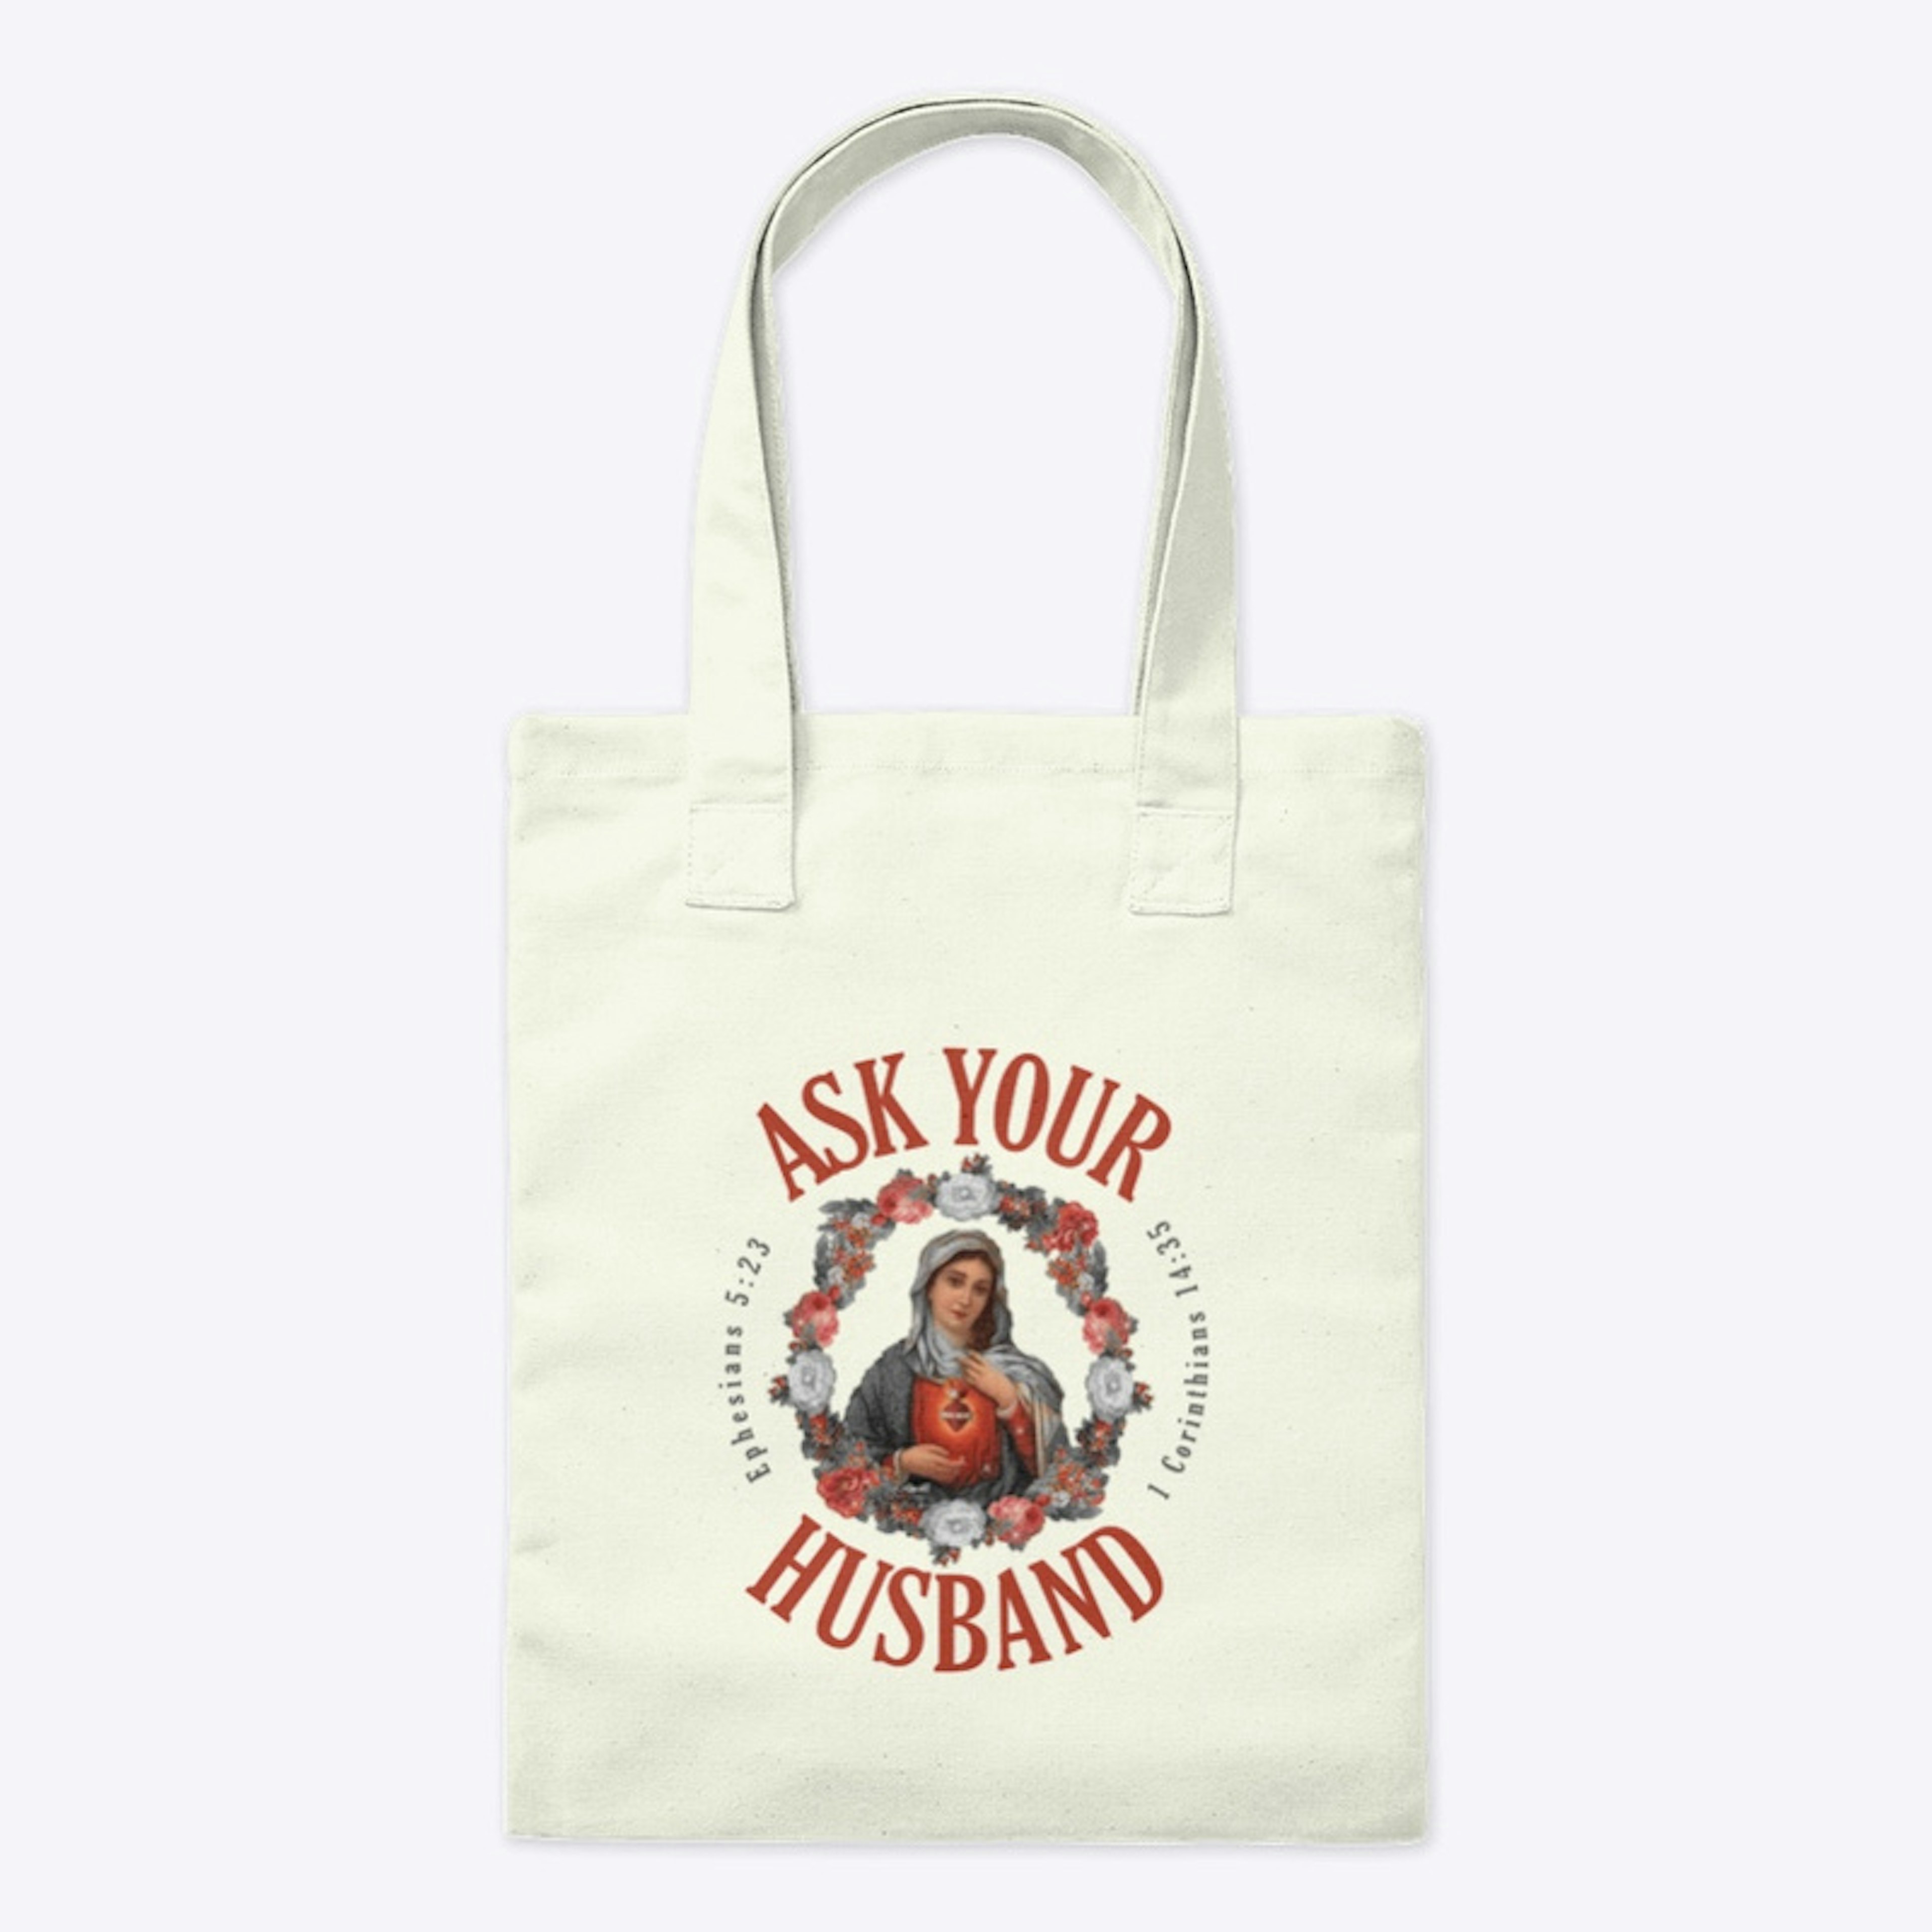 Ask Your Husband Tote